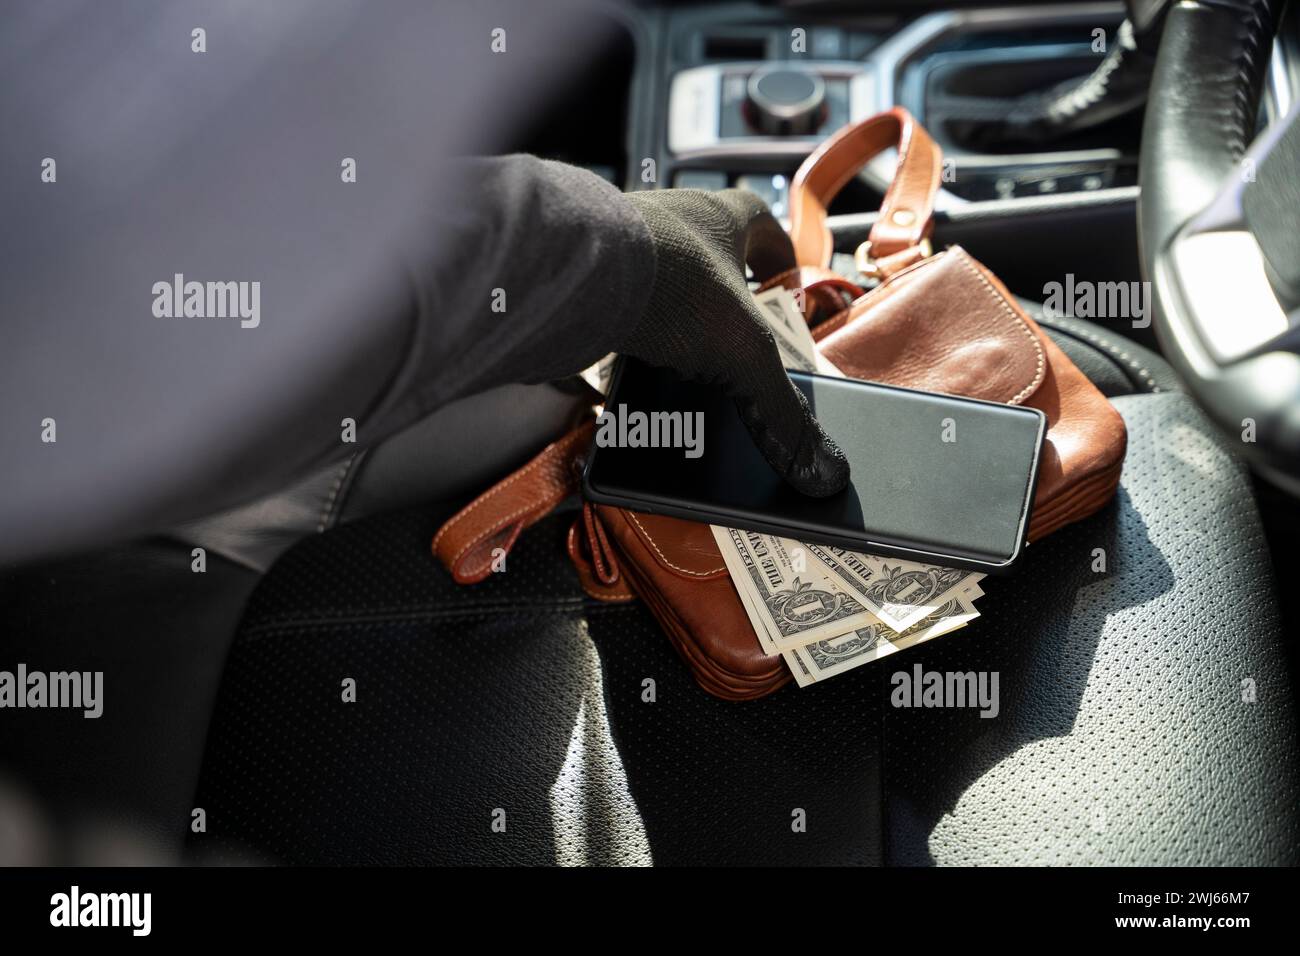 Thieves steal wallet and phone from car seat. Stock Photo